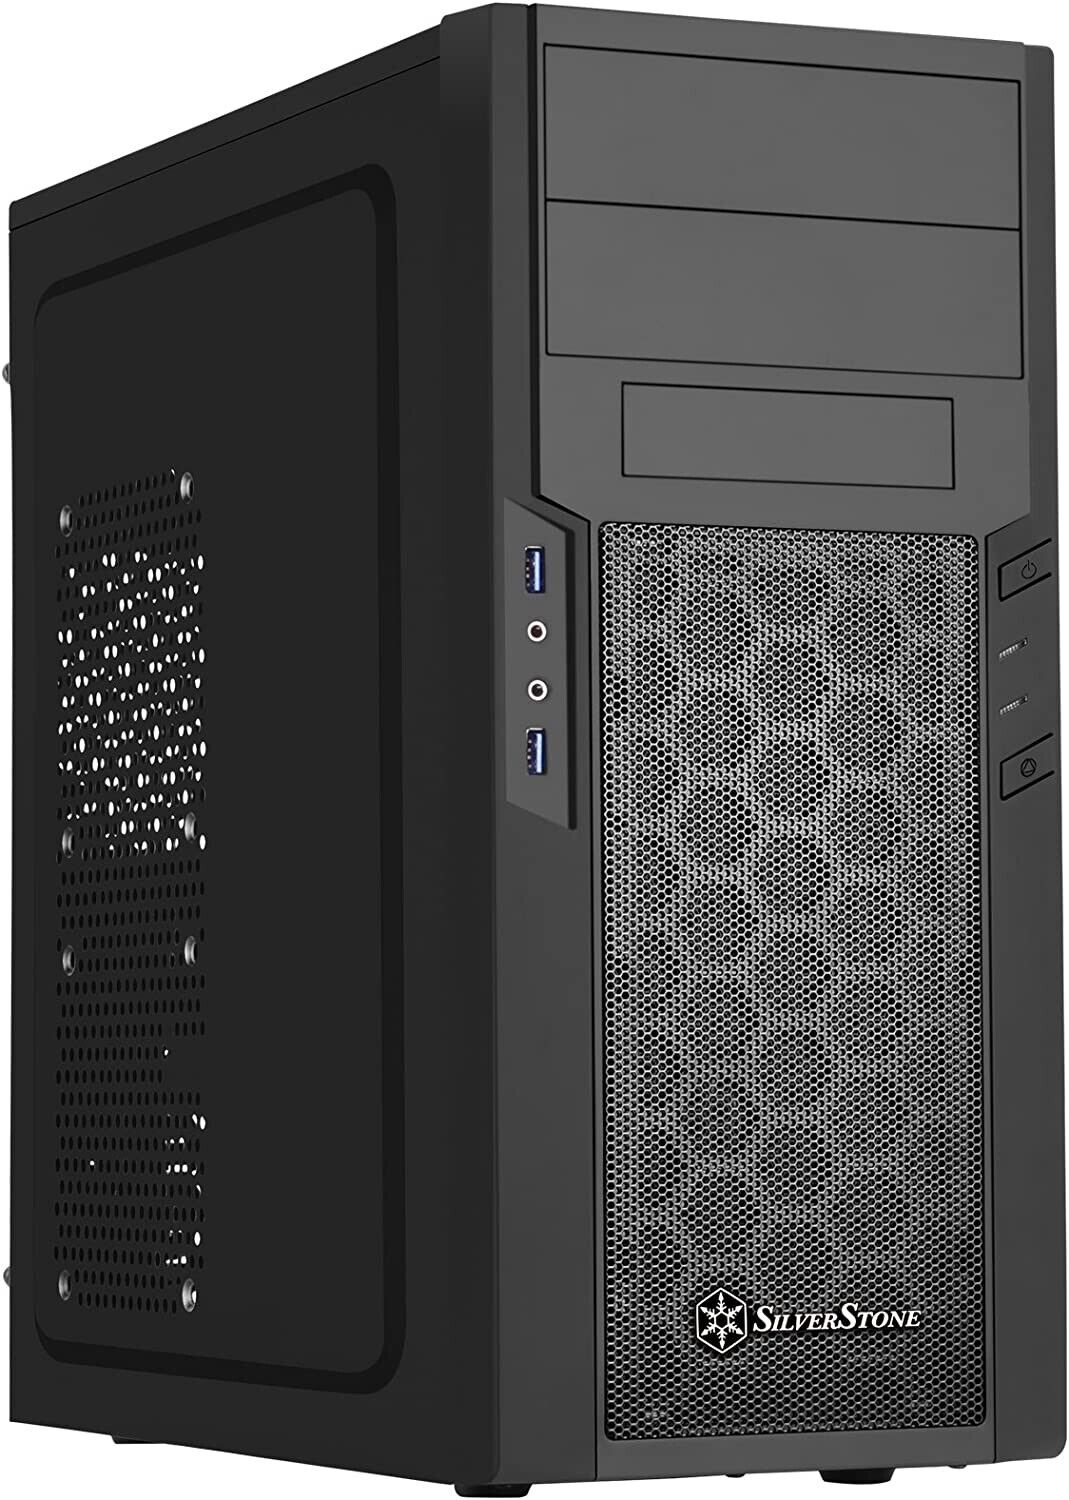 SilverStone Technology PS13B ATX Tower Computer Case with 2 X 5.25 Bays PS13B-x